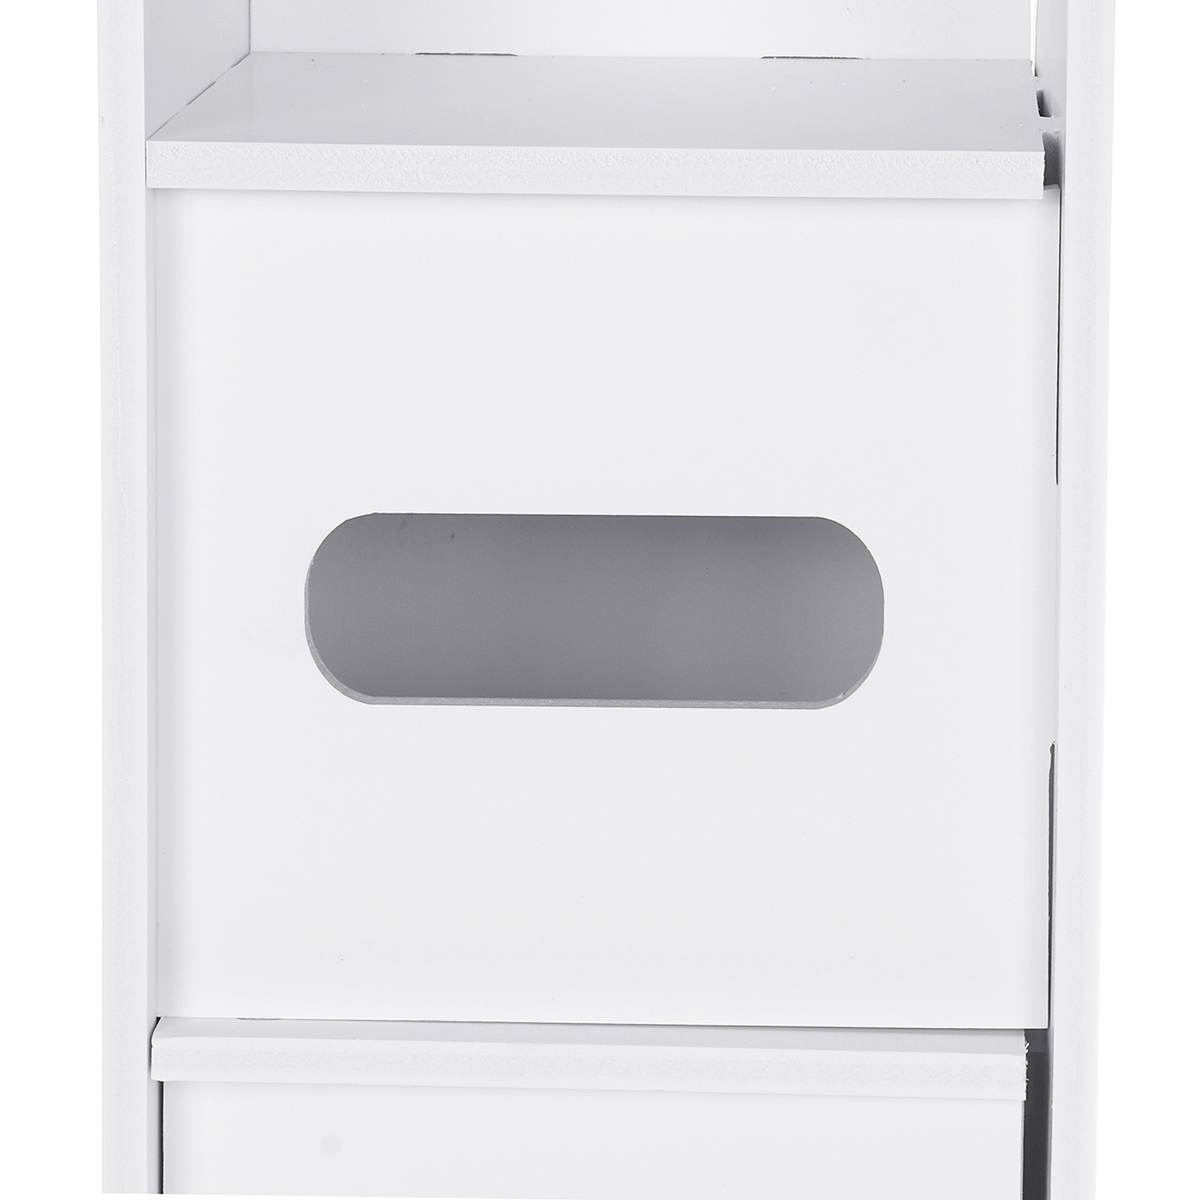 Find Small Bathroom Toilet Storage Cabinet Waterproof Organizer Standing Rack Shelf for Sale on Gipsybee.com with cryptocurrencies